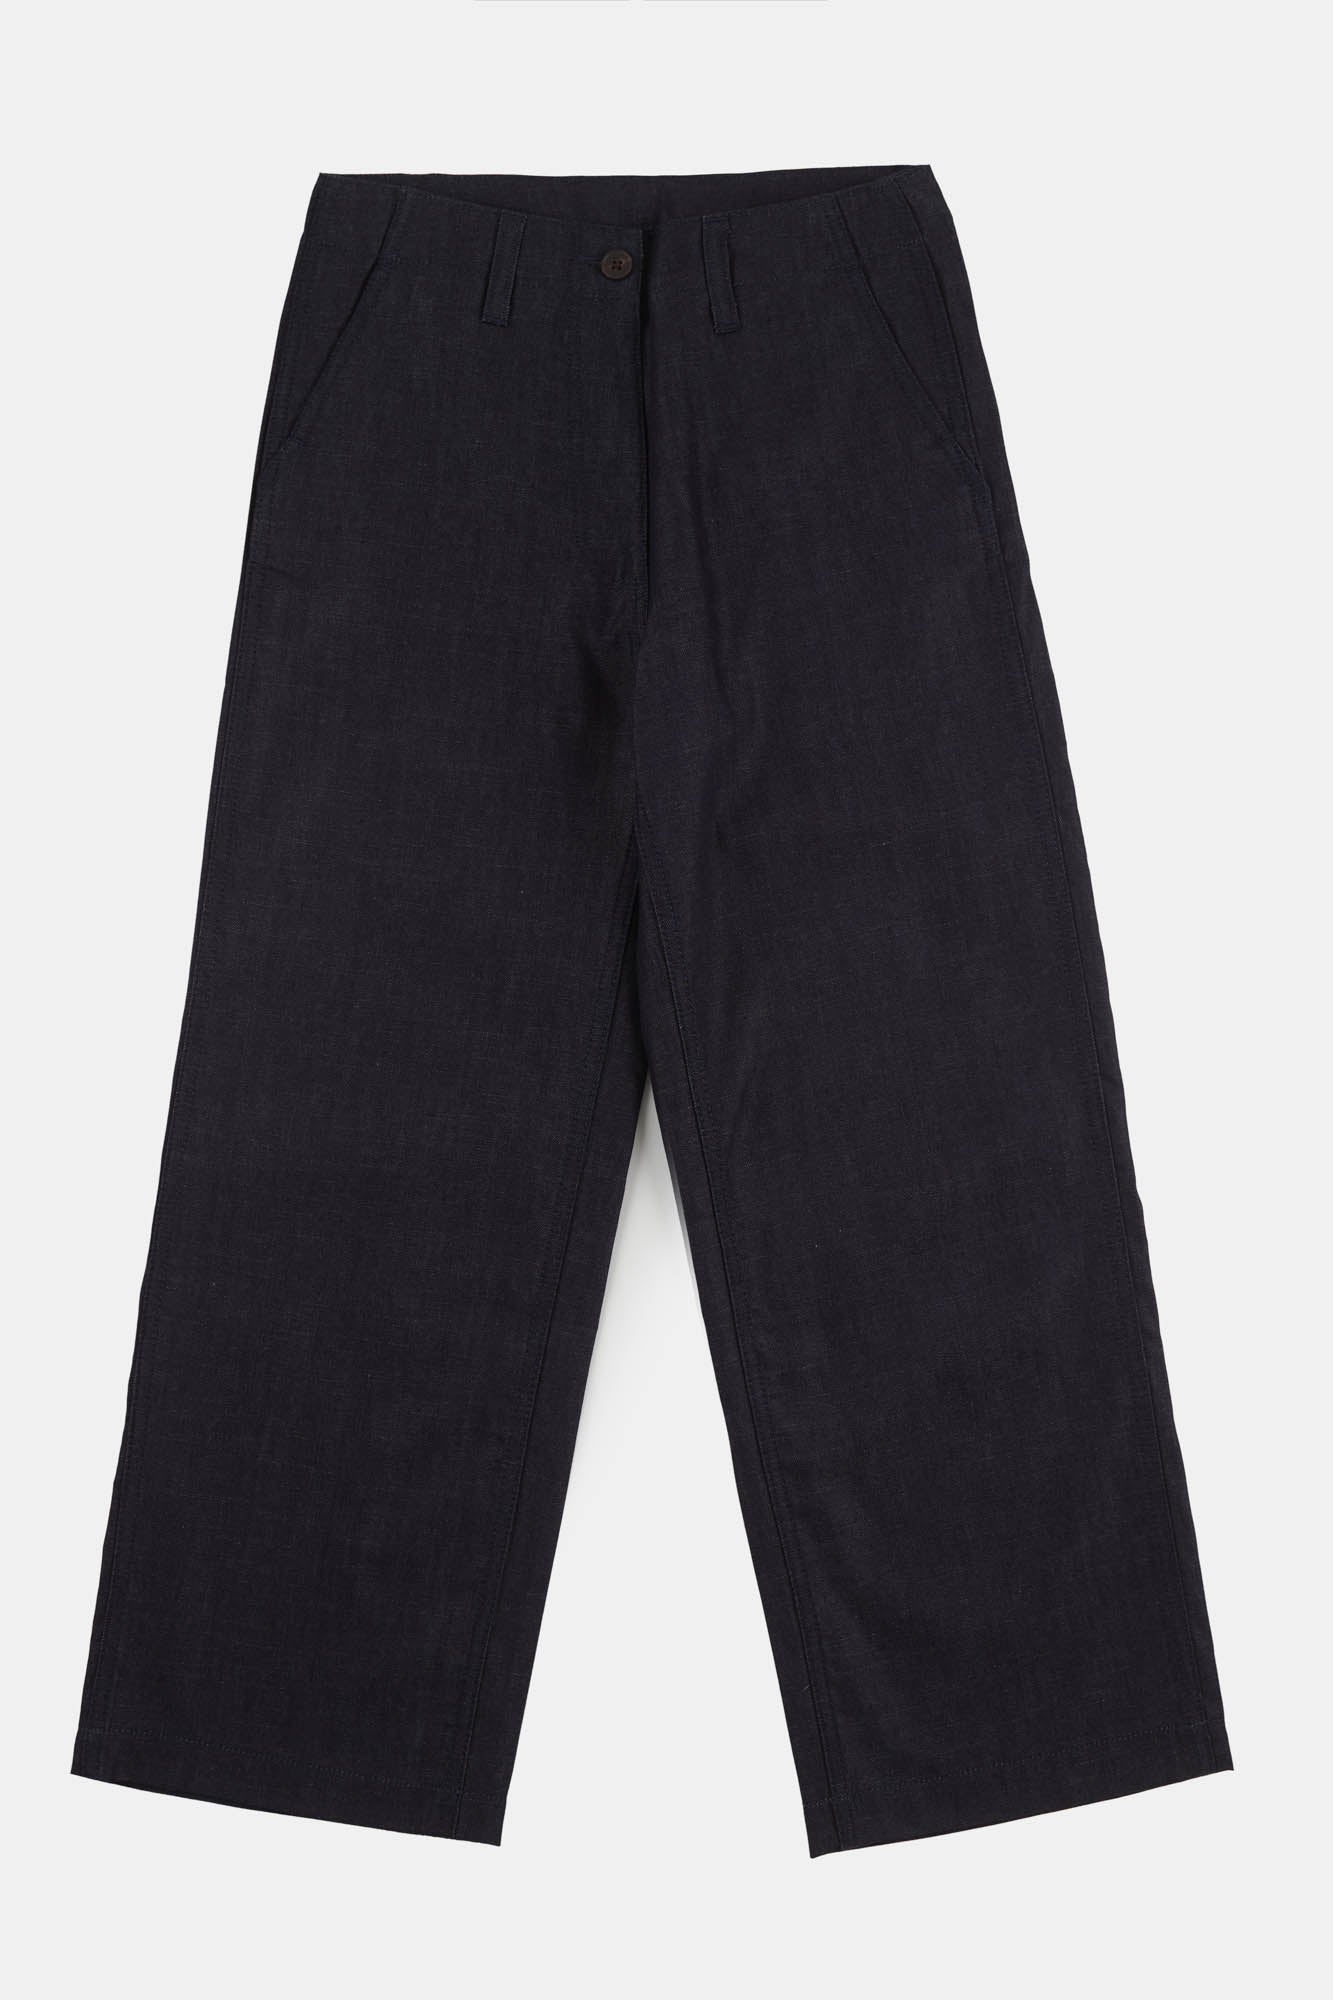 Women's Cropped Work Trousers - Denim - Community Clothing